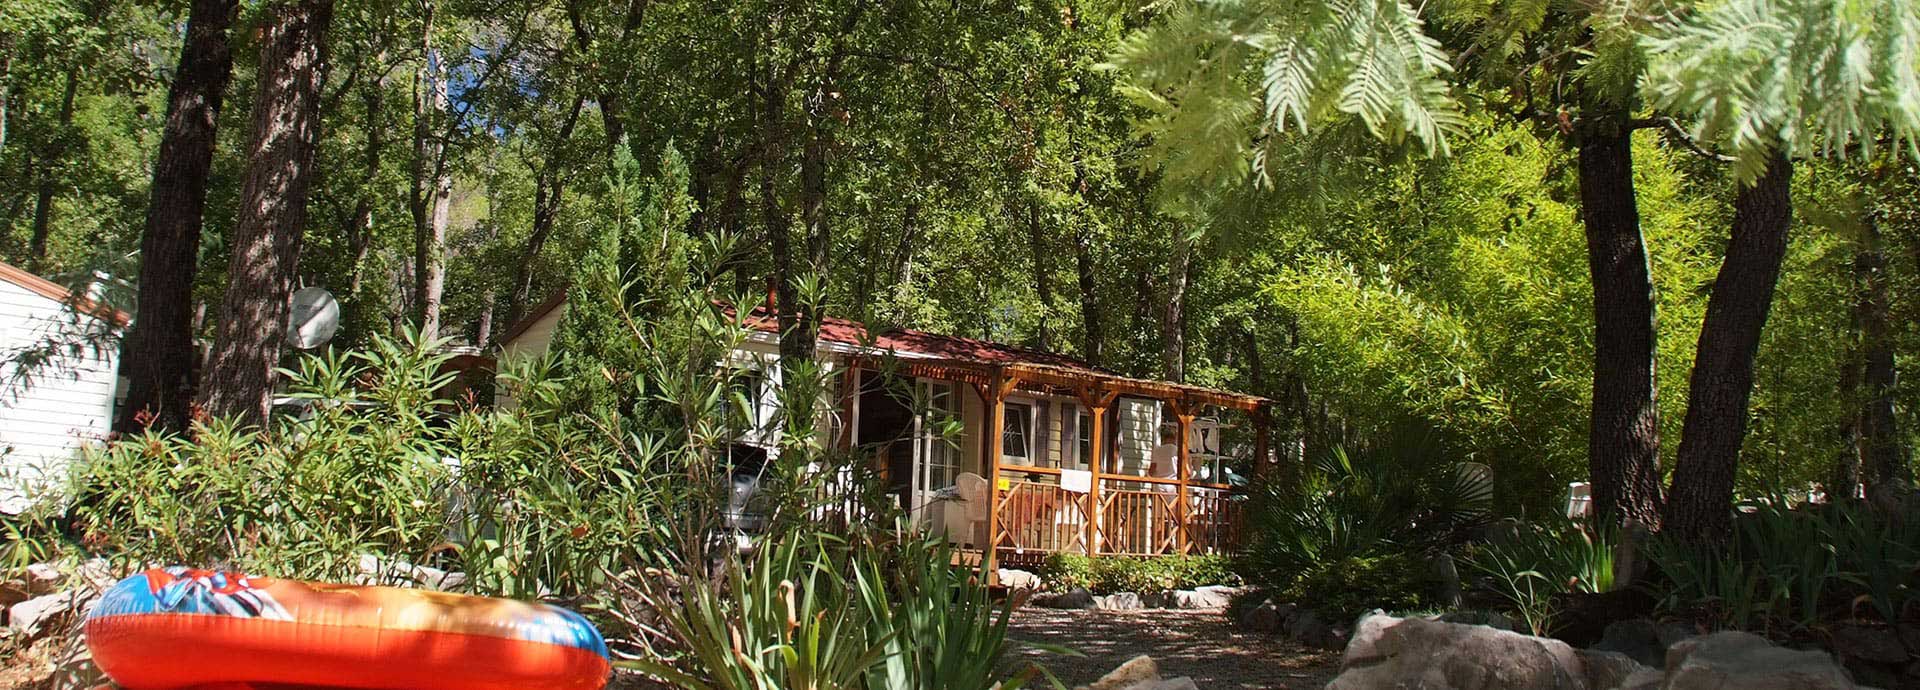 Static caravan rental in the Var, in 4 star Le Parc campsite, situated inland from Fréjus